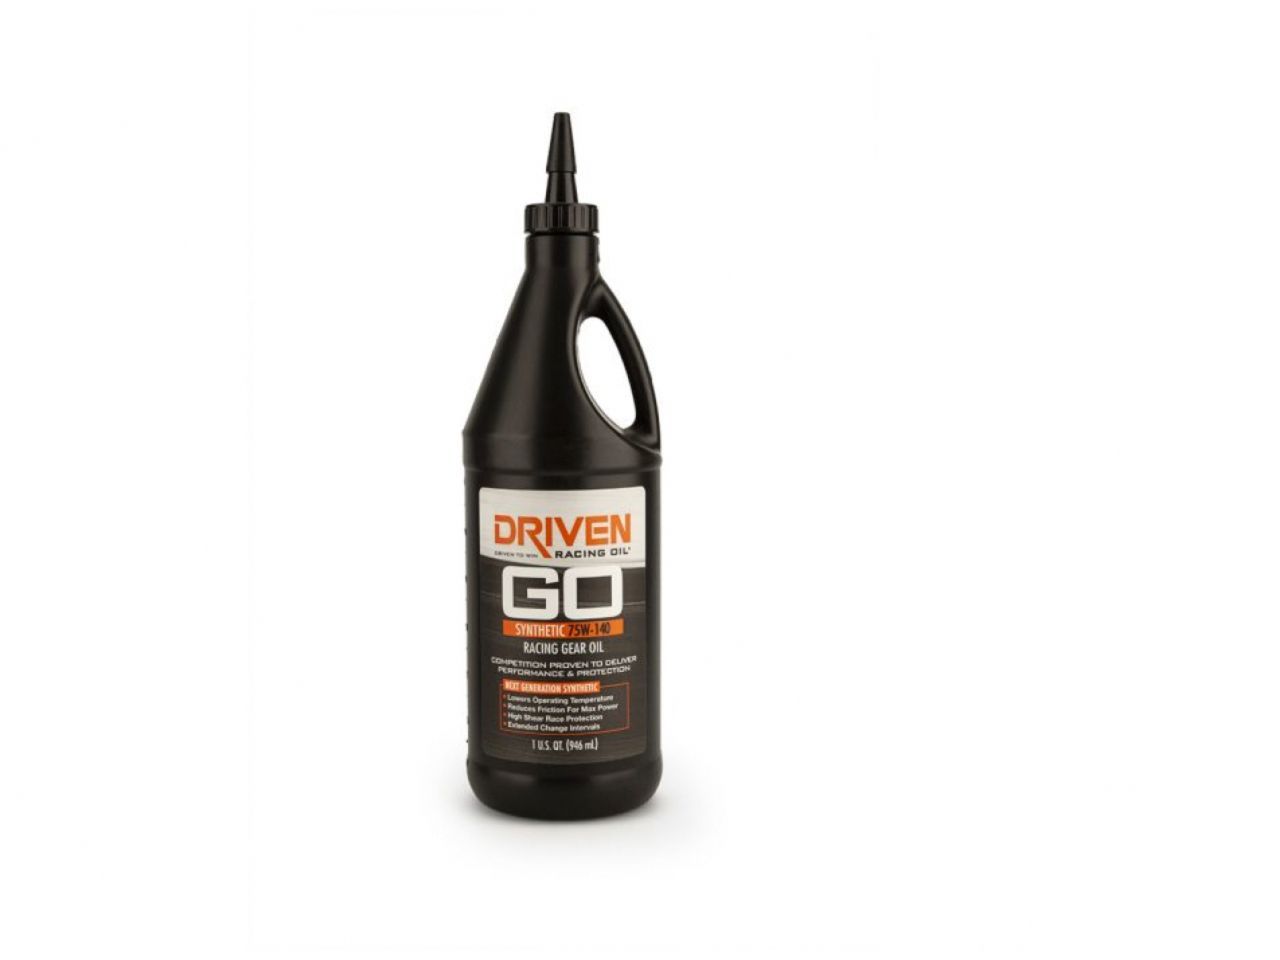 Driven Racing Oil Transmission Gear Oil 04330 Item Image